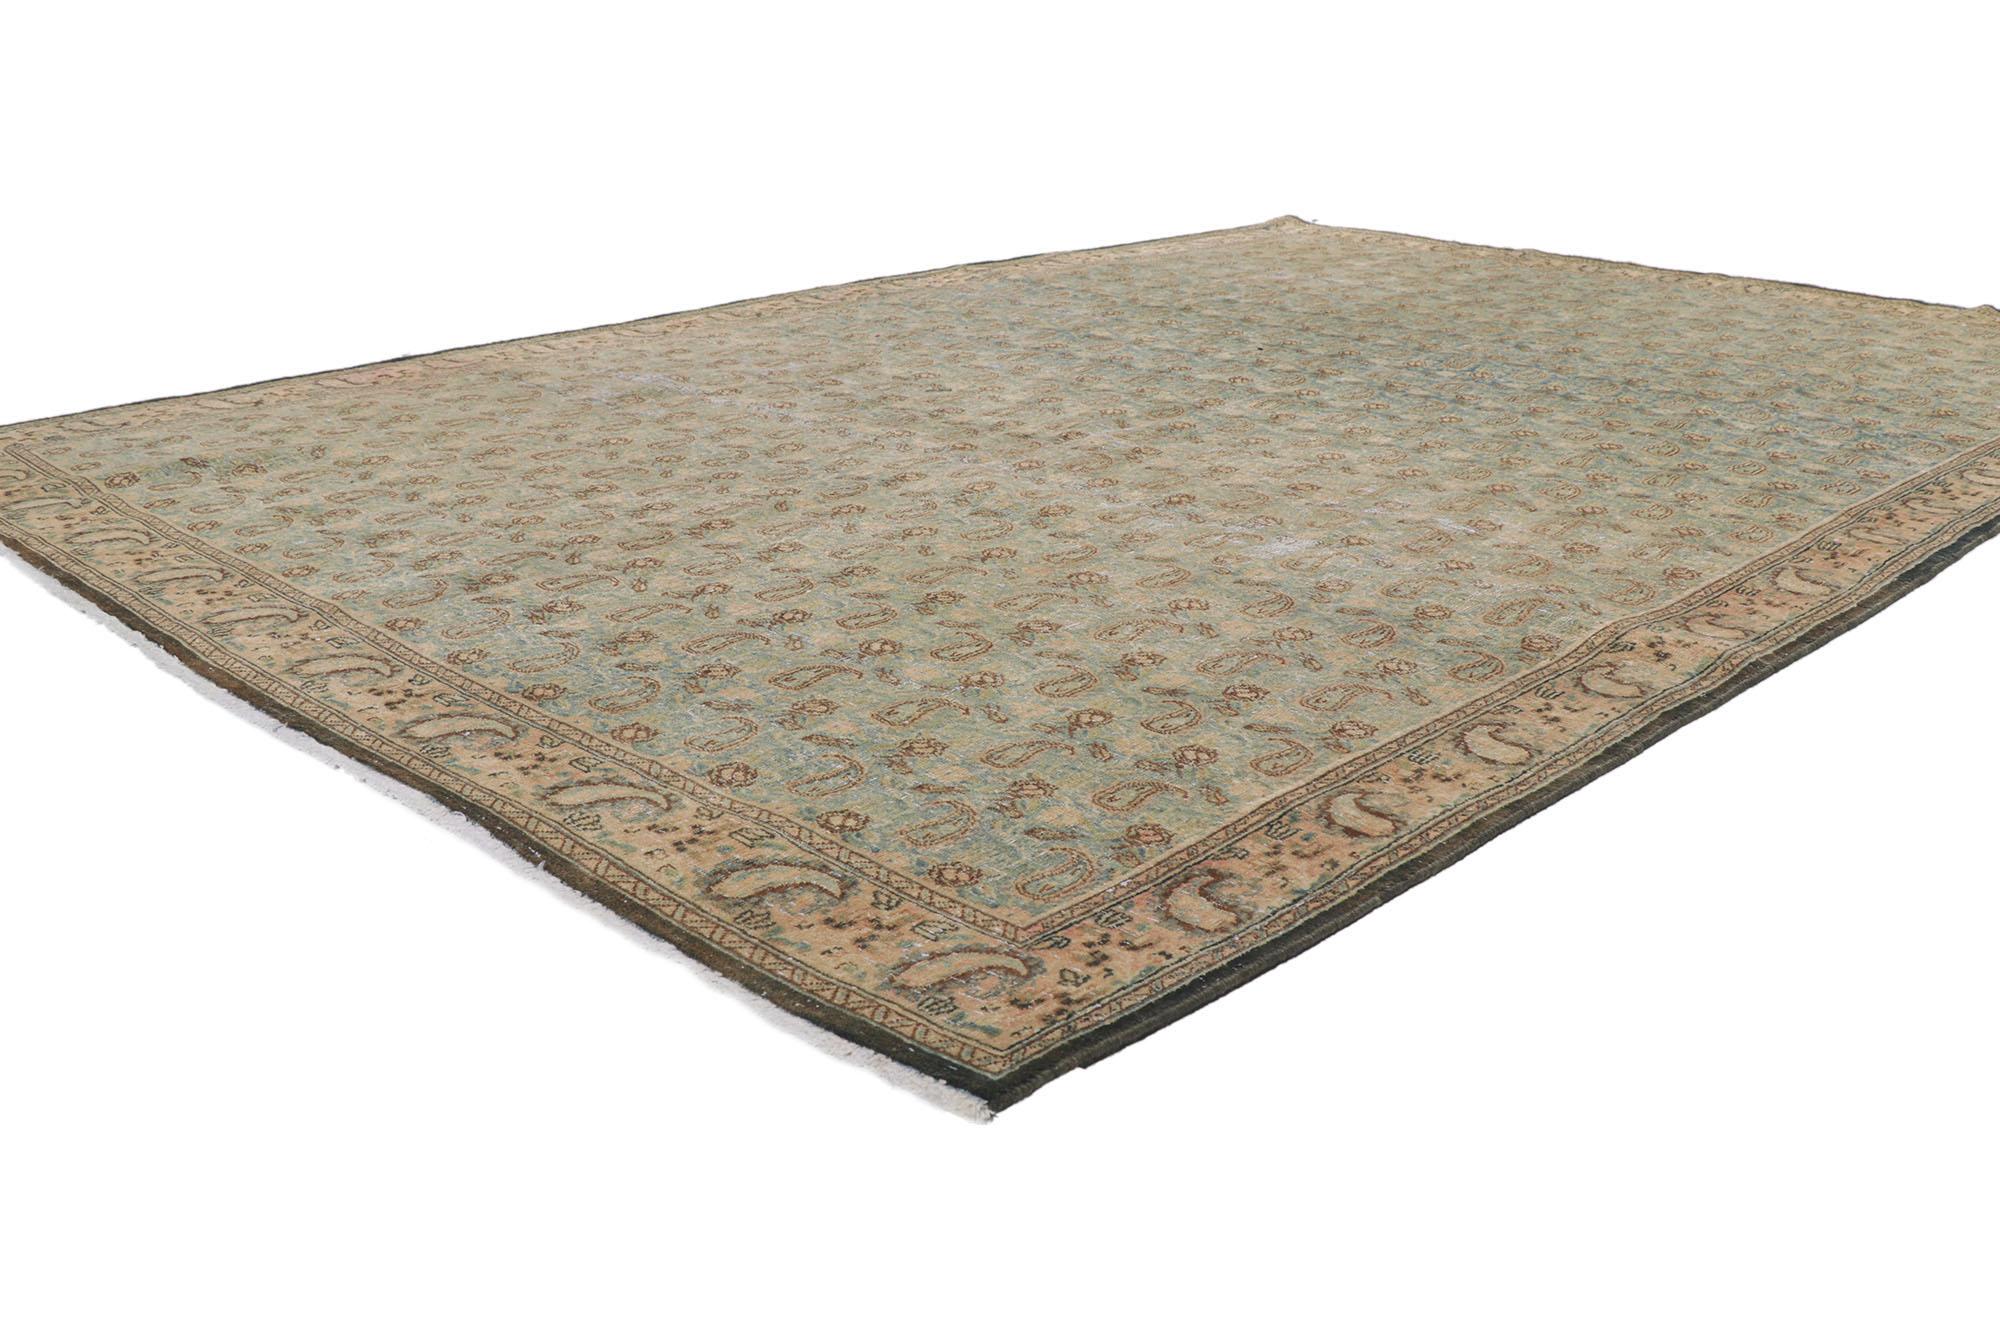 61004 Distressed Vintage Persian Qum Rug, 06'09 x 09'05.
Weathered finesse meets ivy league prep in this hand knotted wool distressed vintage Persian Qum rug. The allover paisley design and antique-washed colors in this piece work together creating